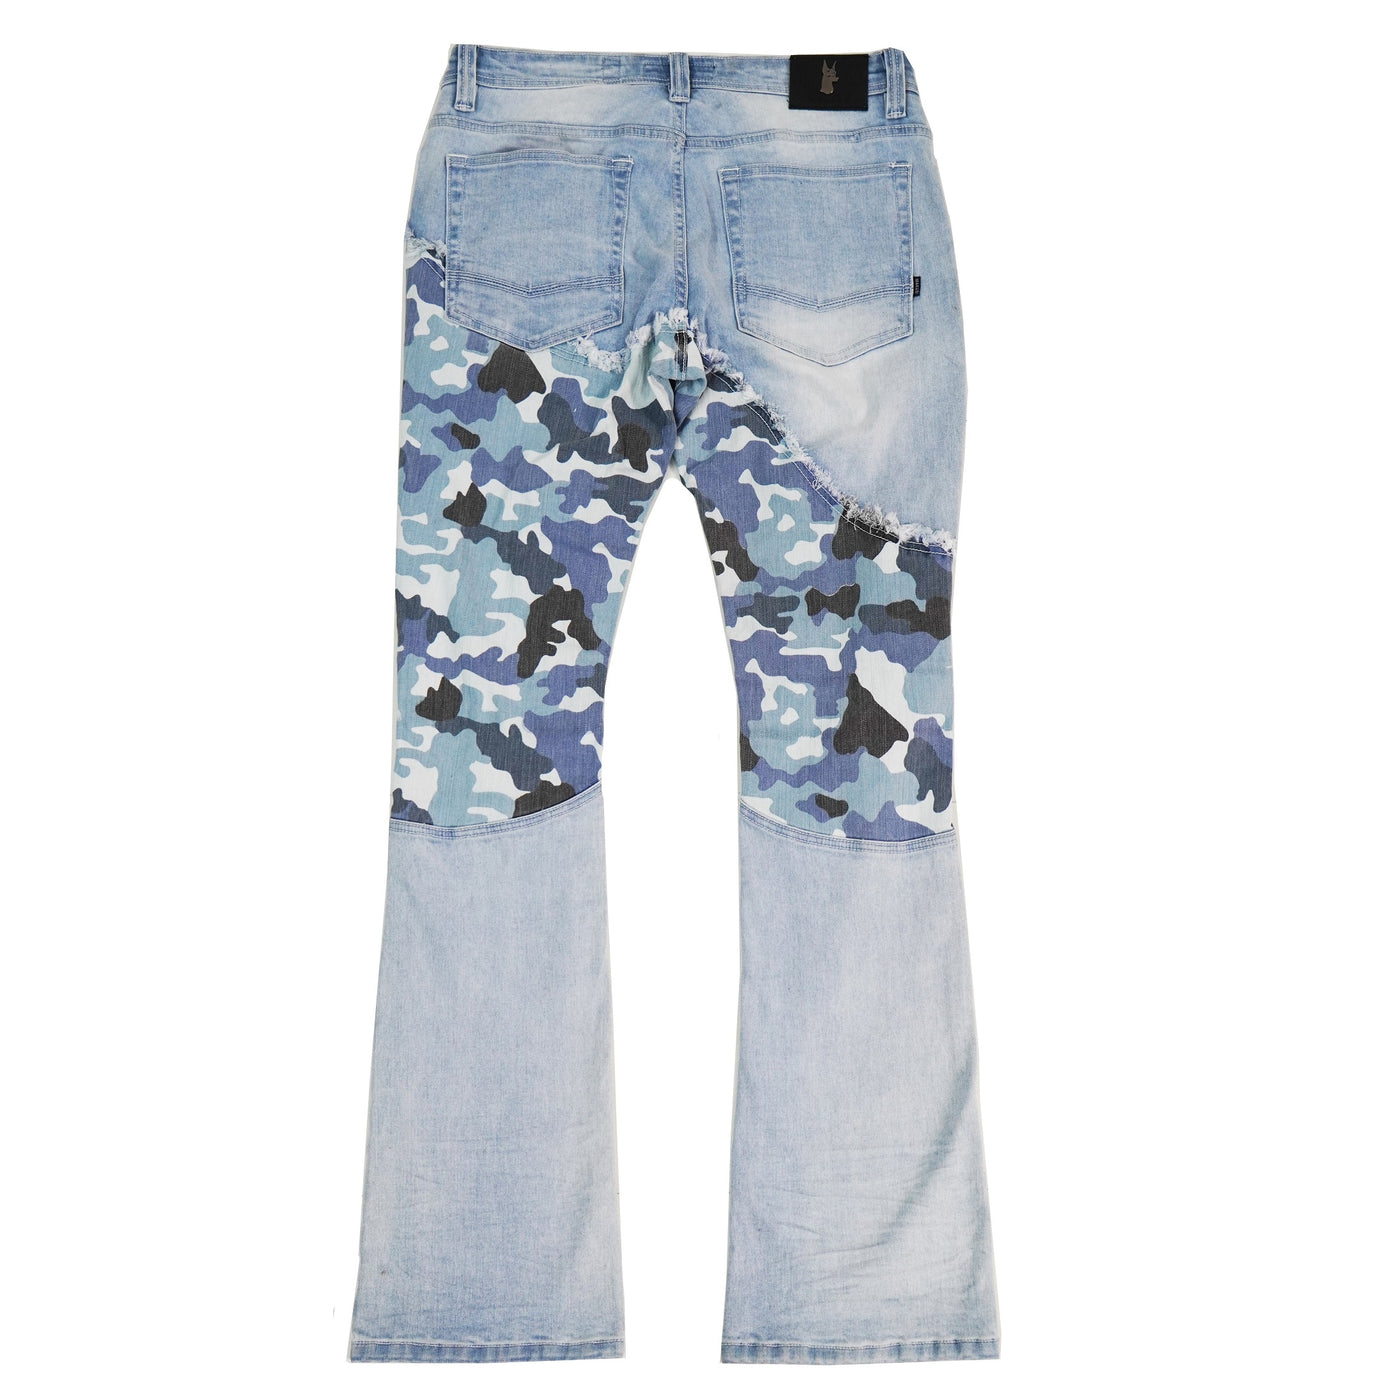 M1919 Costello Stack Jeans - Light Wash